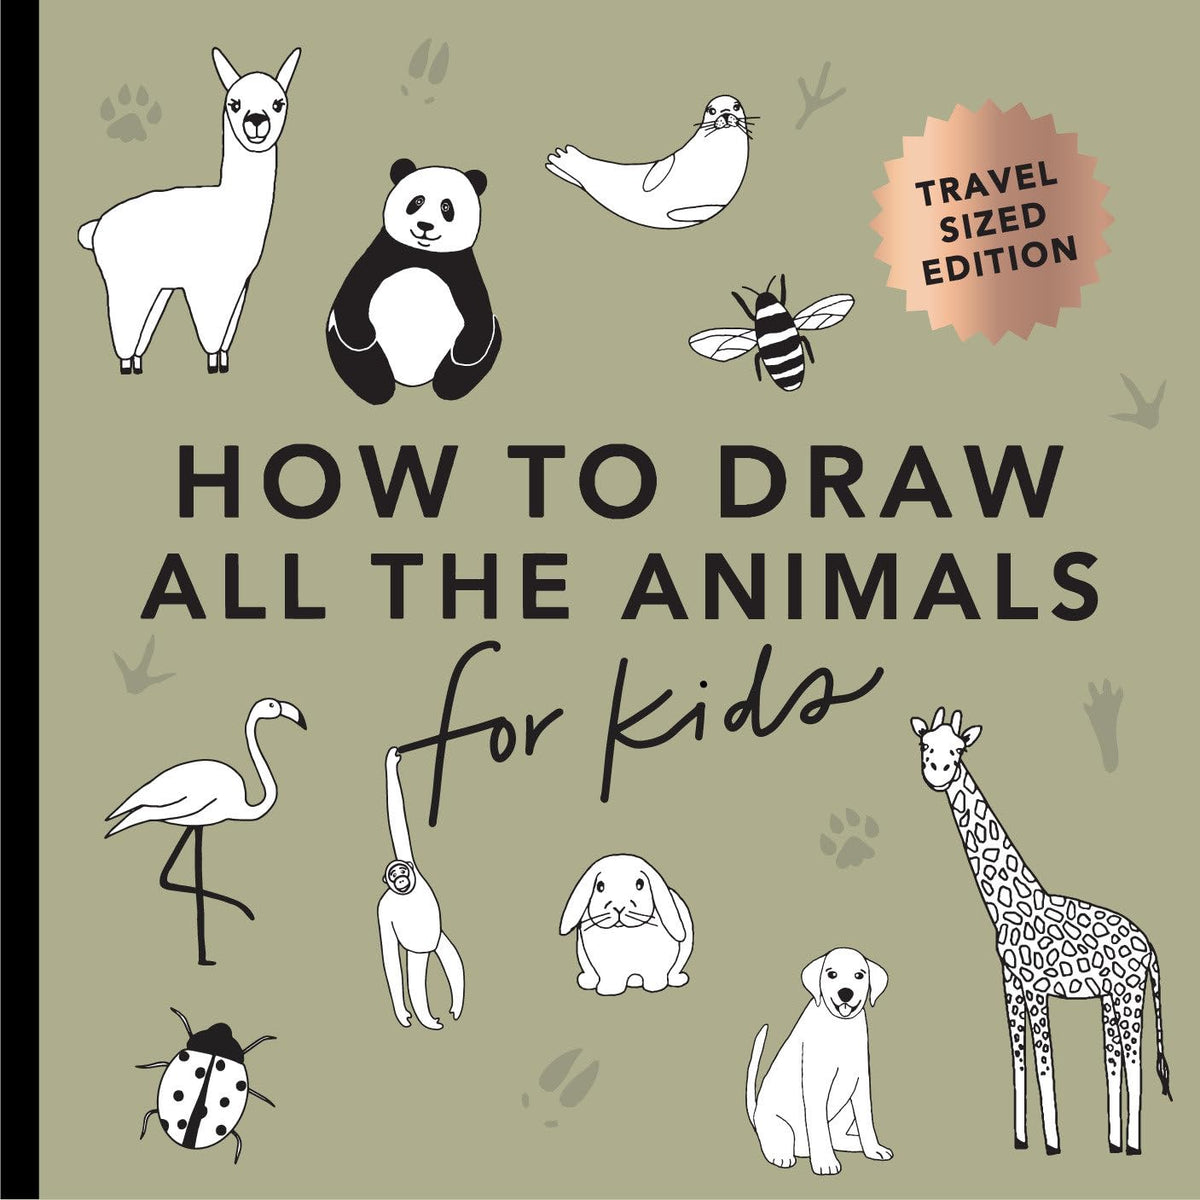 How to Draw: All the Animals